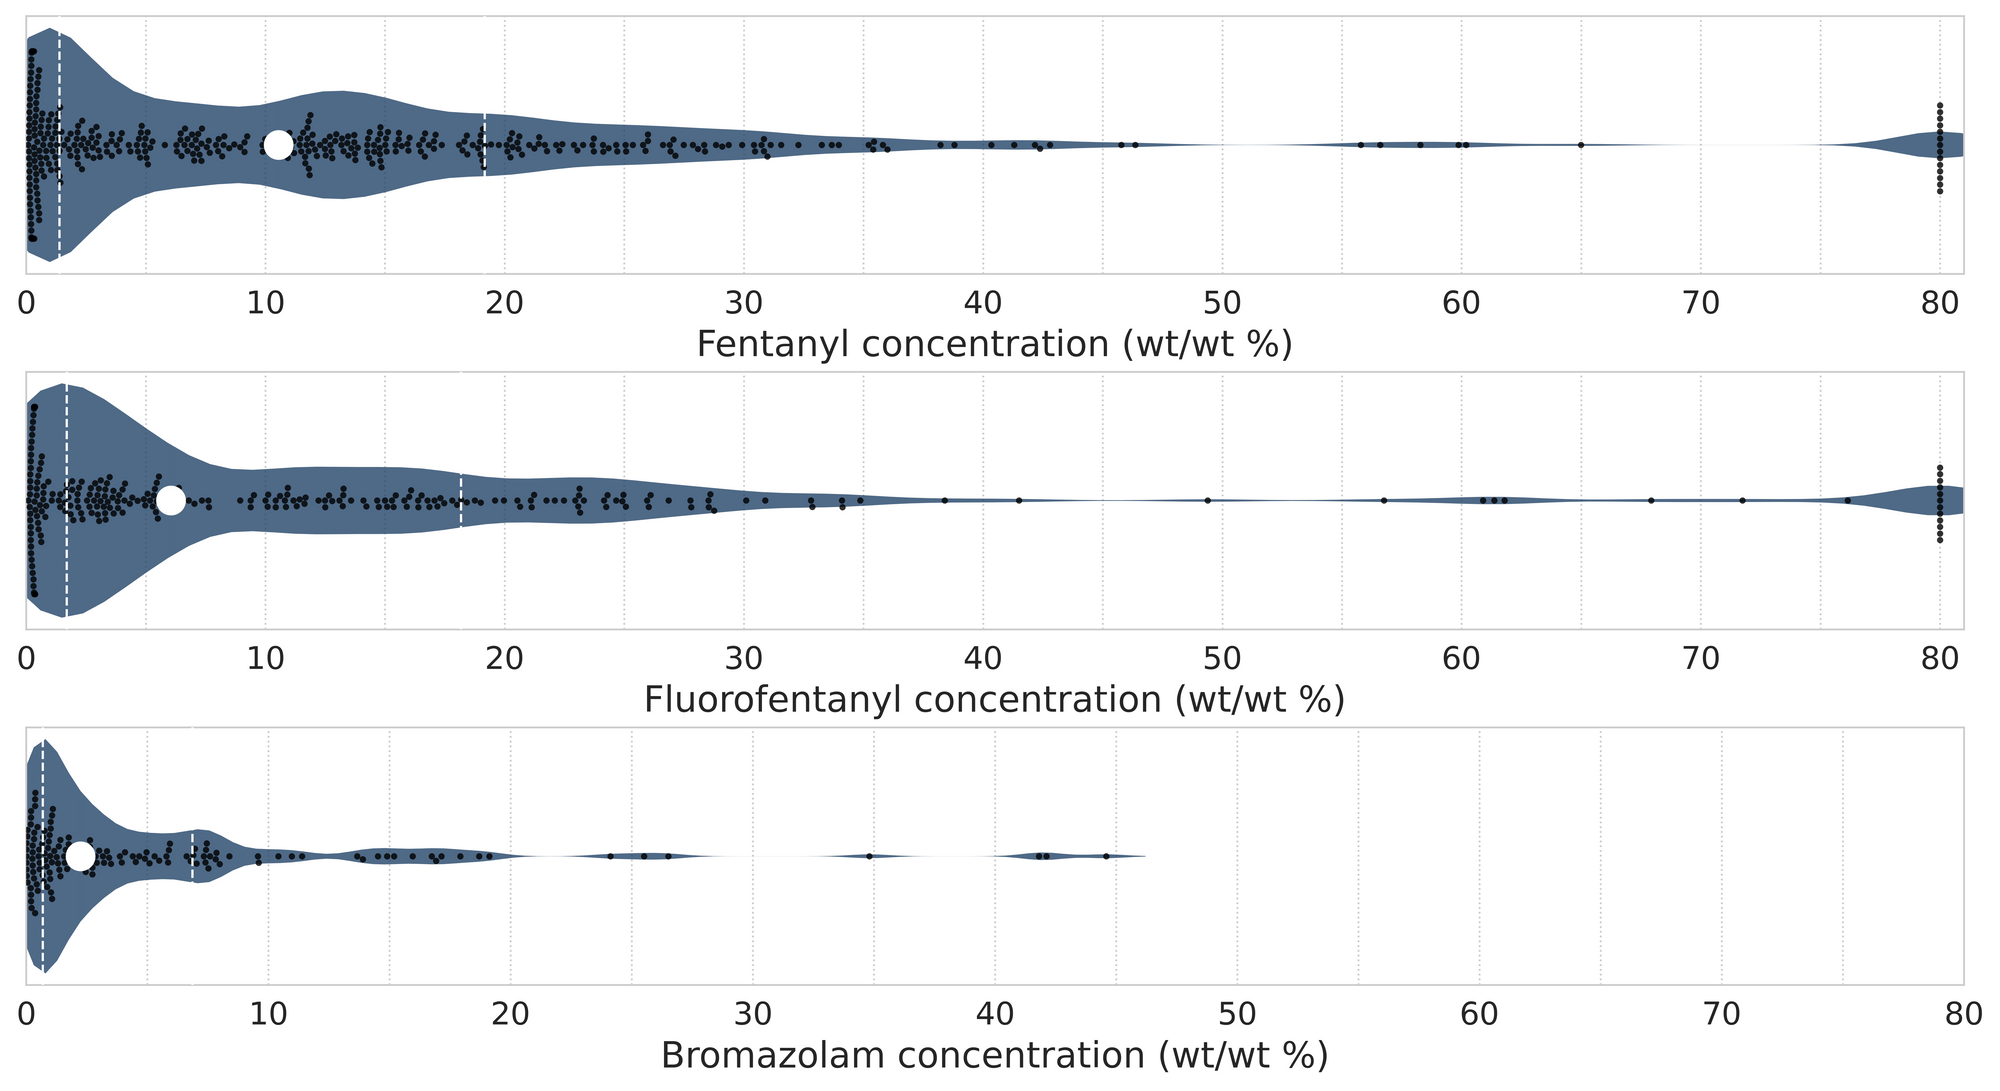 Figure 4. Violin plots of fentanyl (top panel), fluorofentanyl, (middle panel), and bromazolam (bottom) positive samples quantified during May across all collection locations/methods.